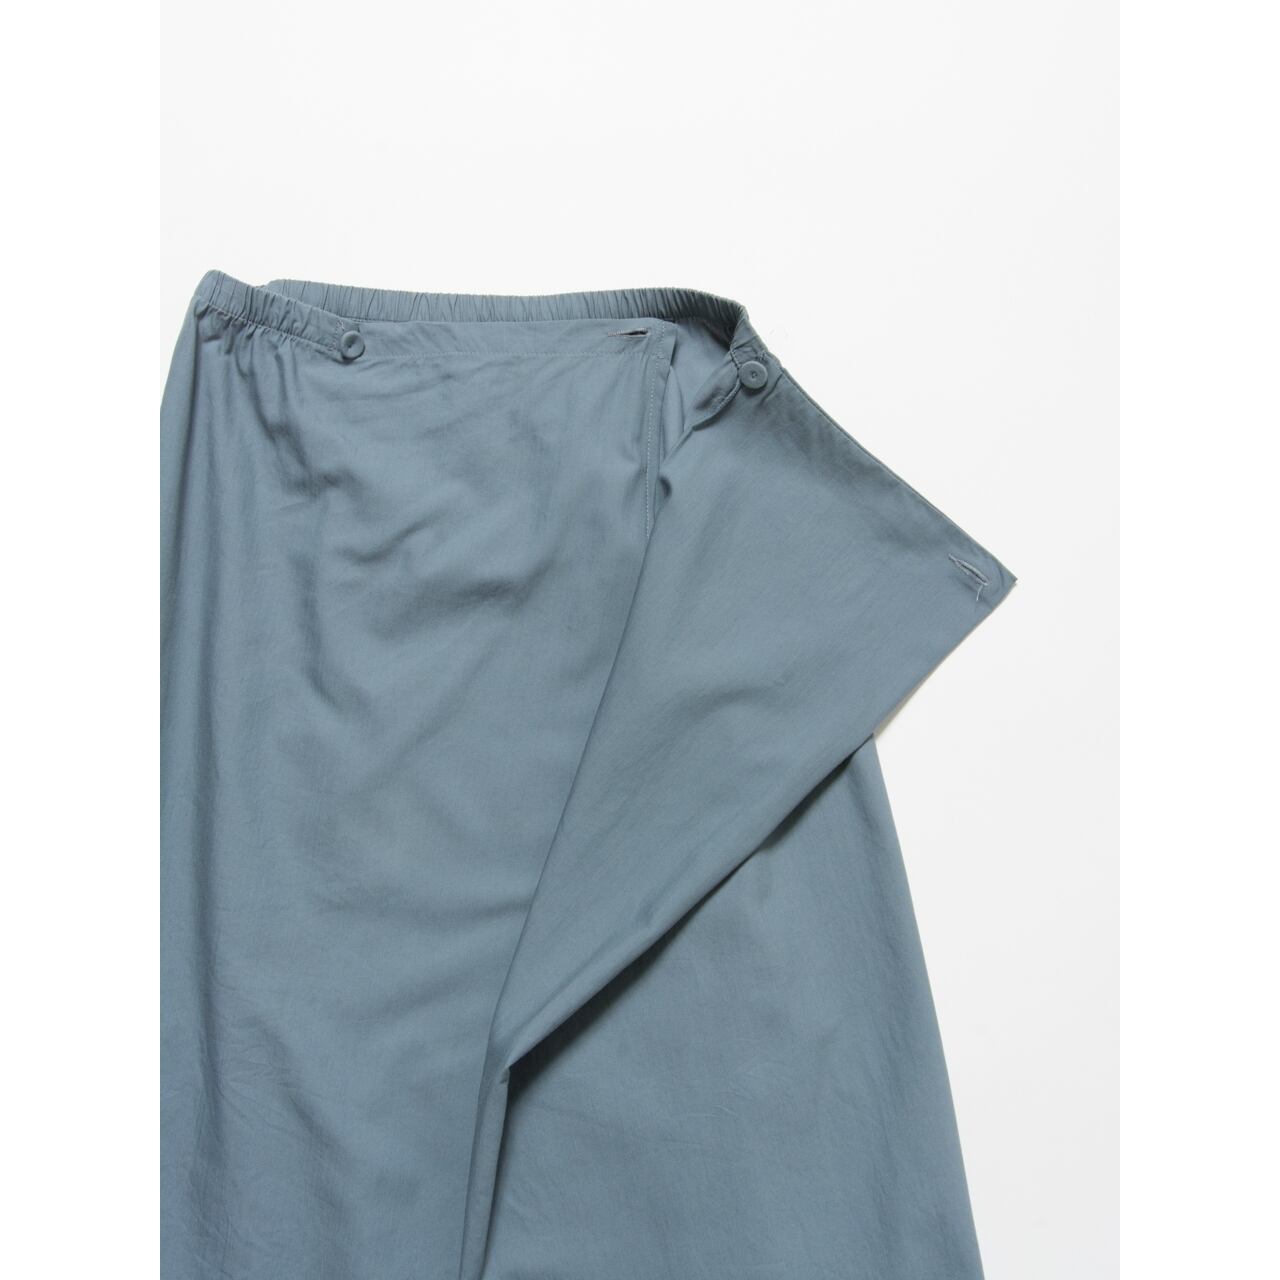 【MAde in Italy】Mi-mollet length wrap flare skirt（イタリア製 ミモレ丈ラップフレアスカート）3a